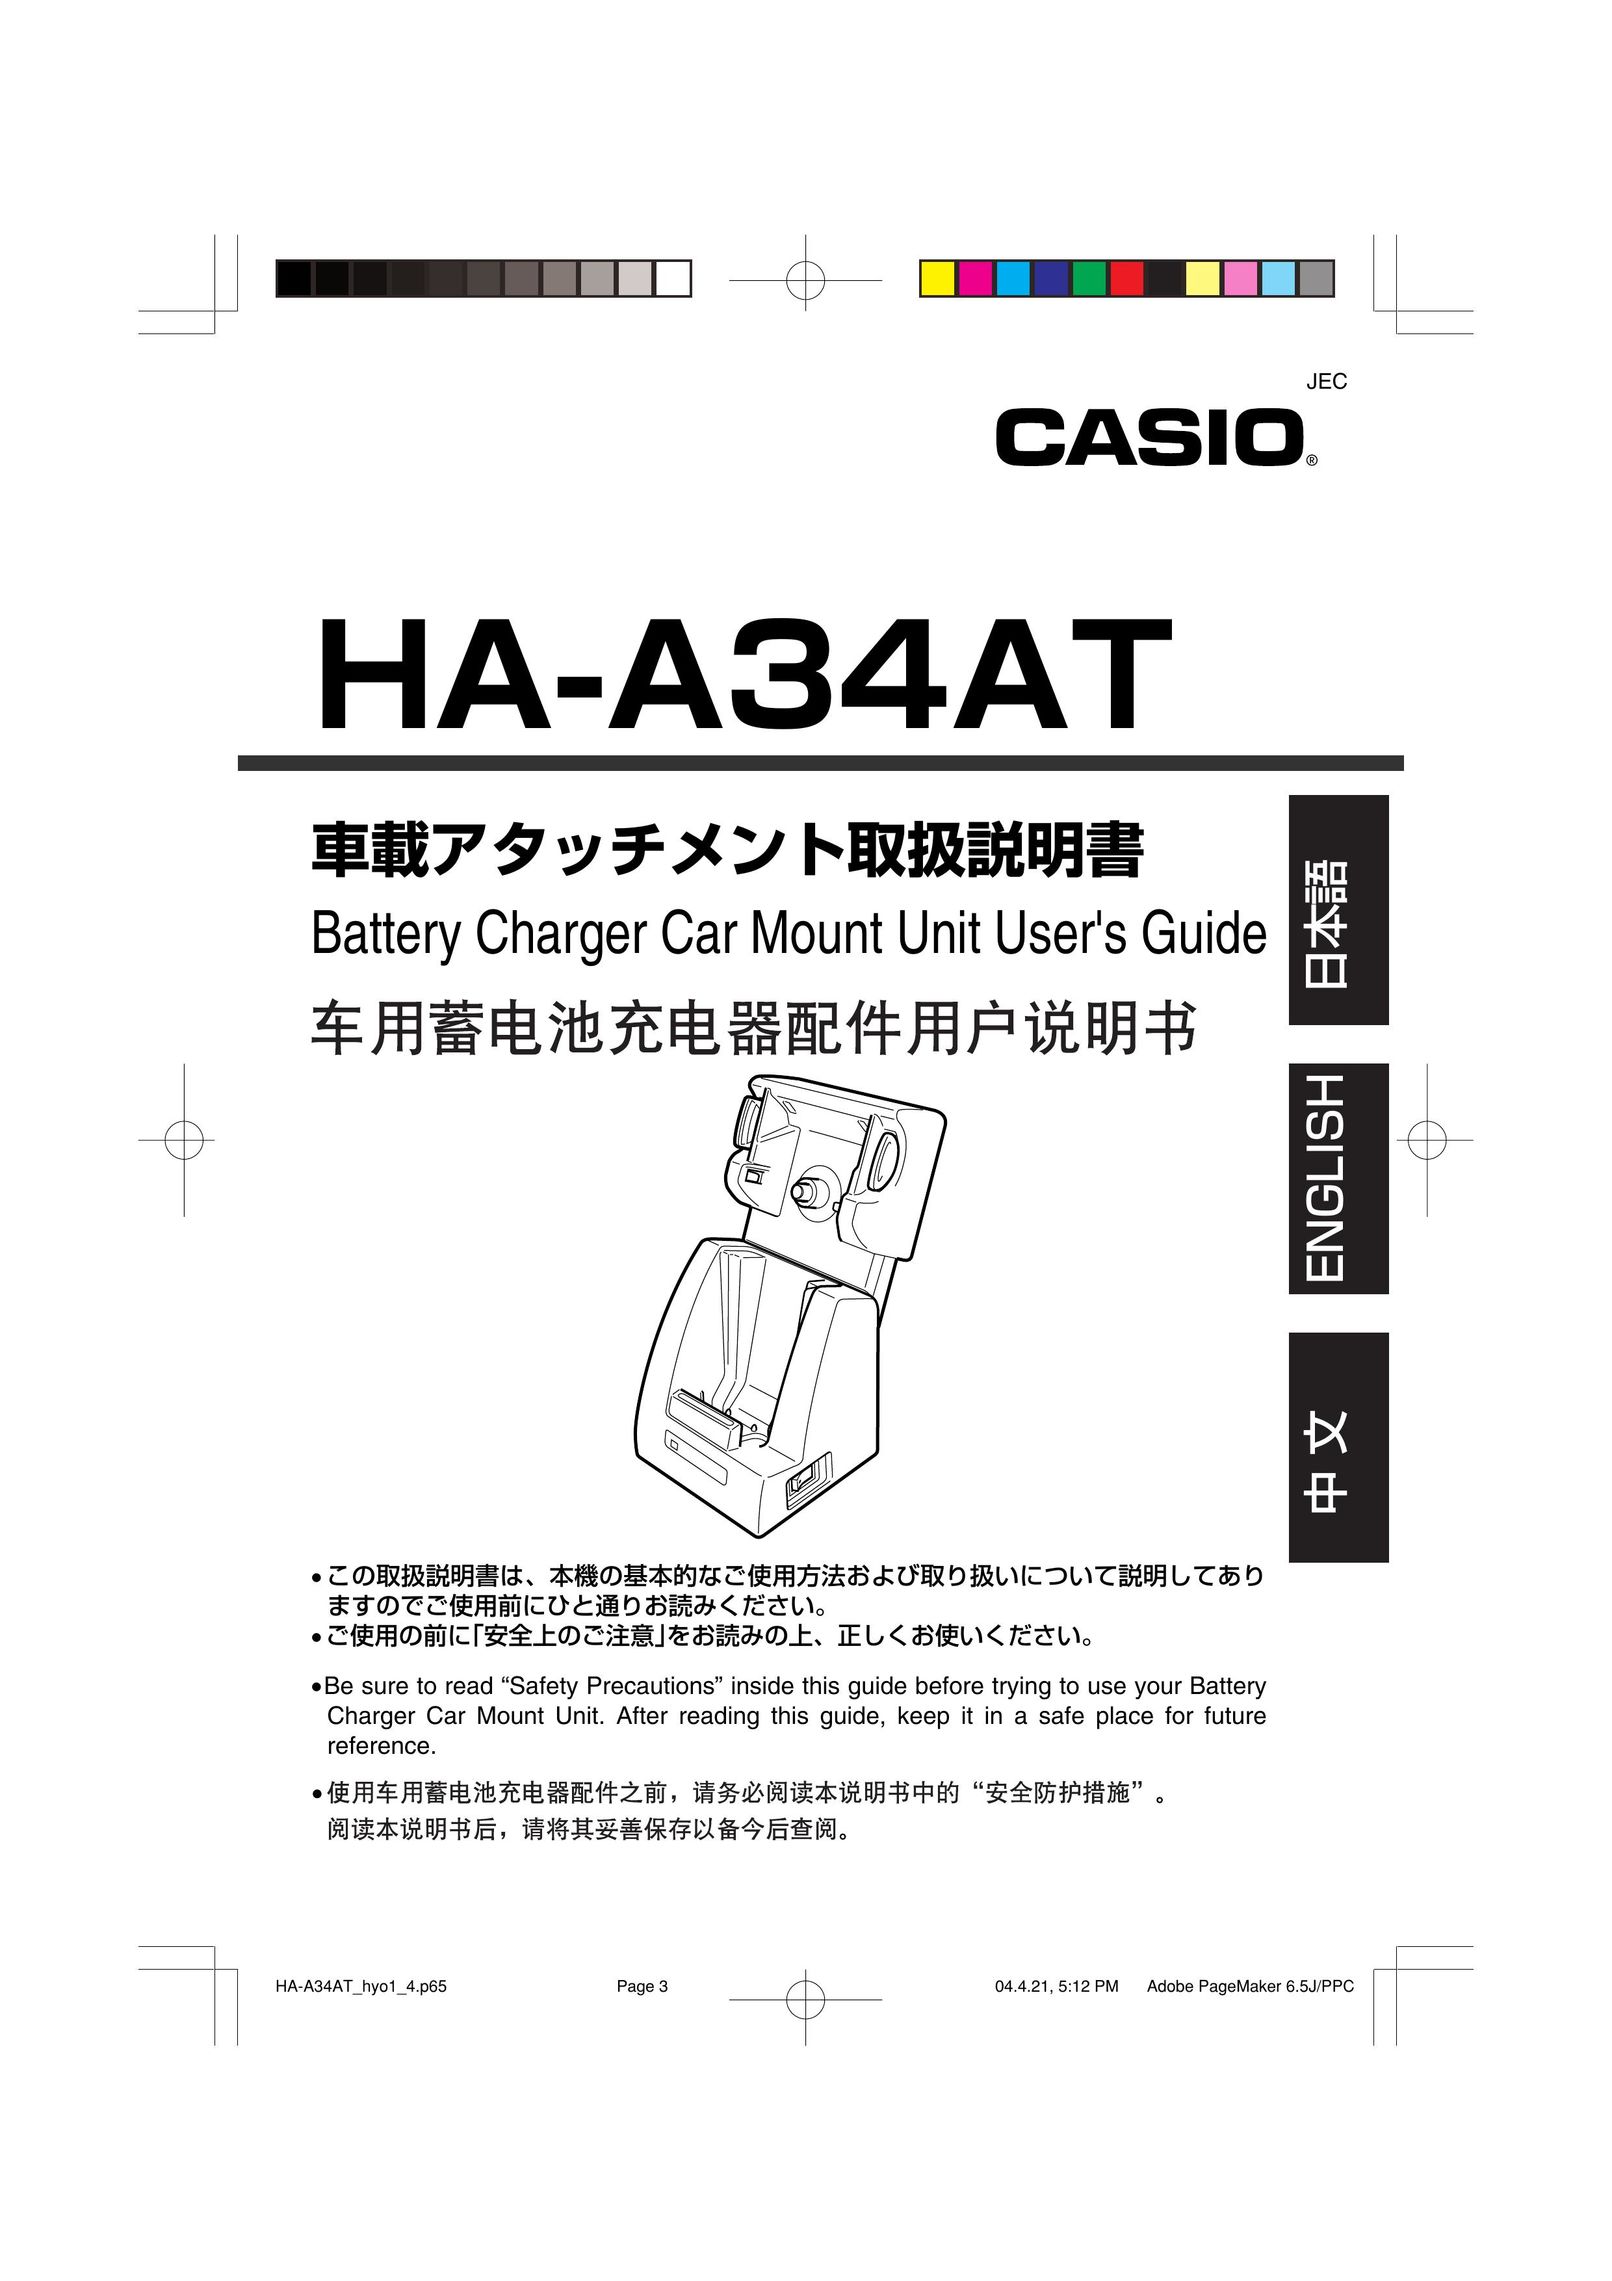 Casio HA-A34AT Battery Charger User Manual